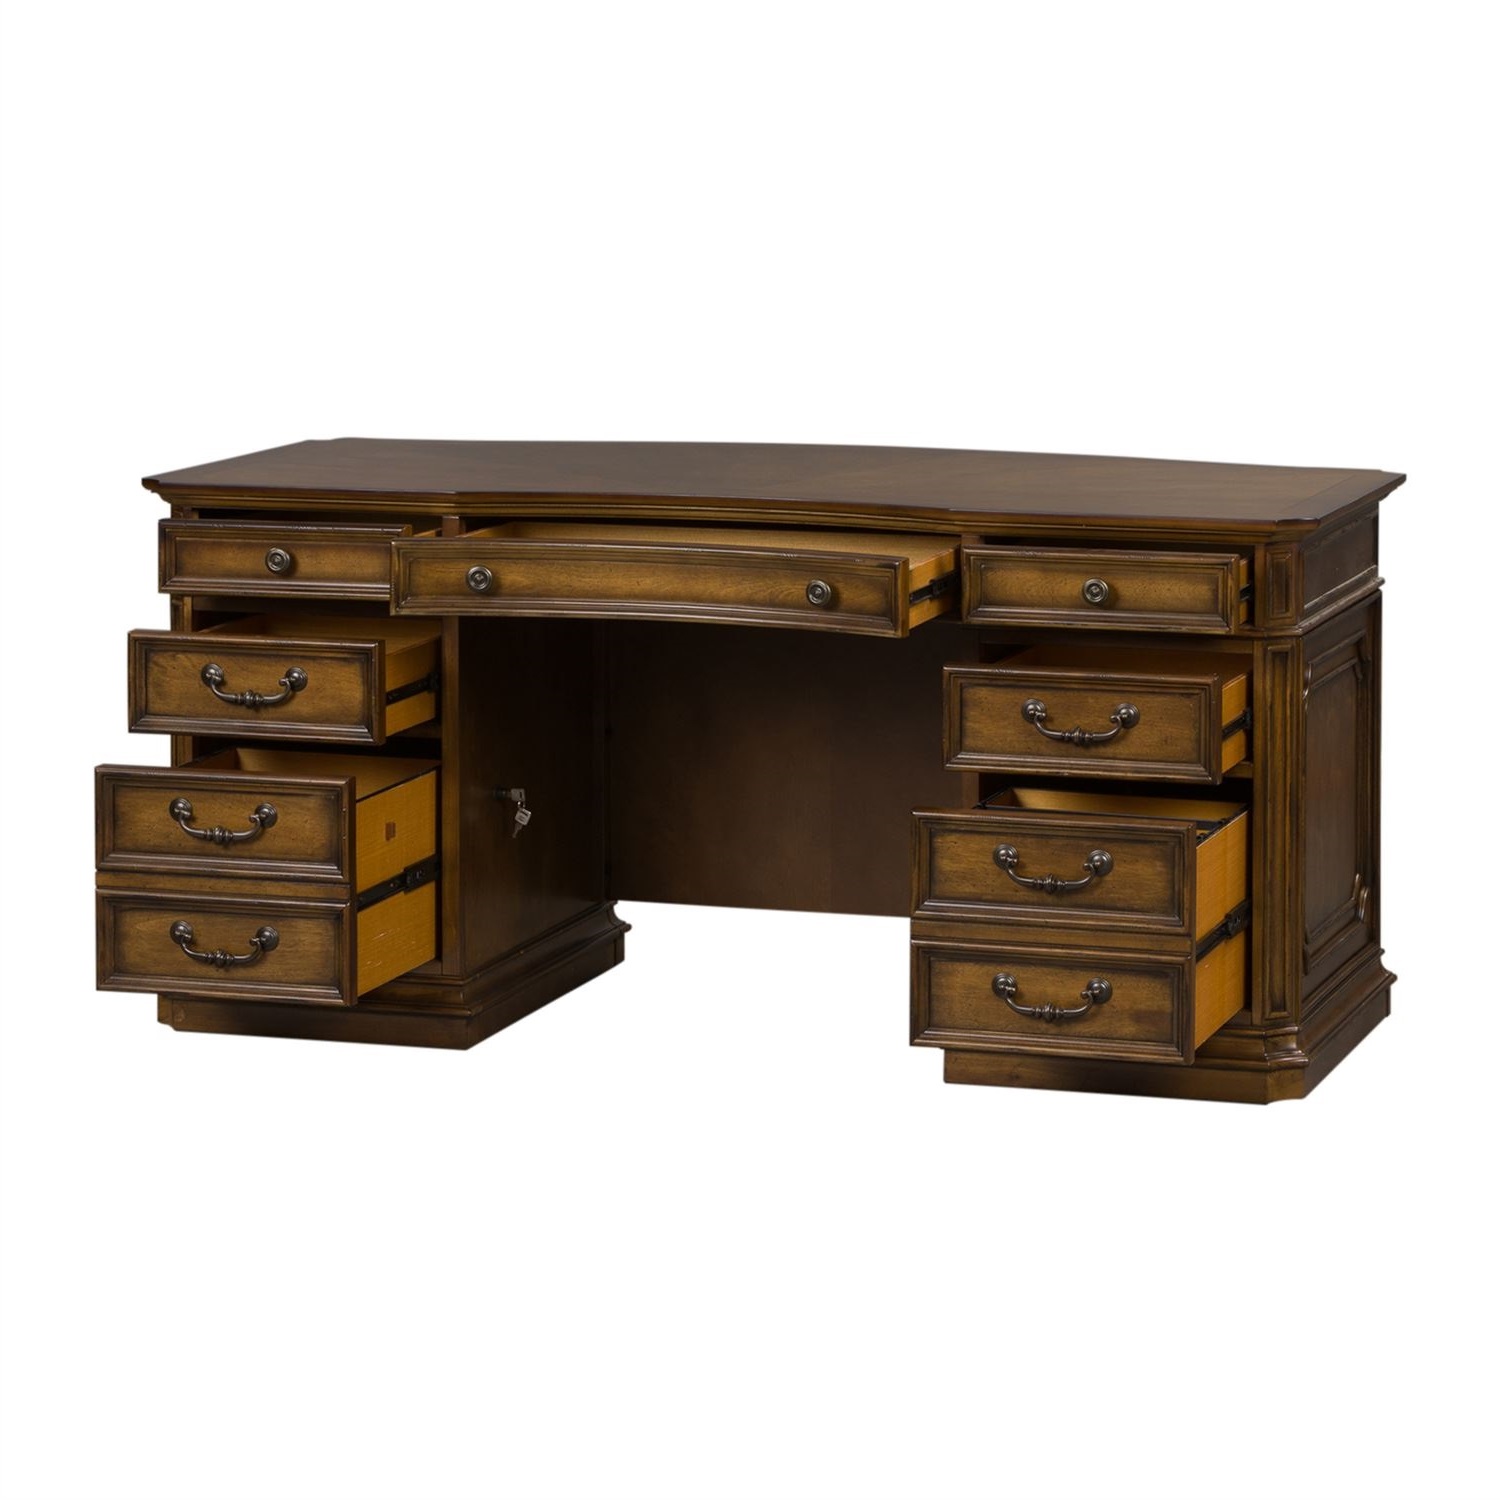 American design furniture by Monroe Hamilton executive desk drawers out